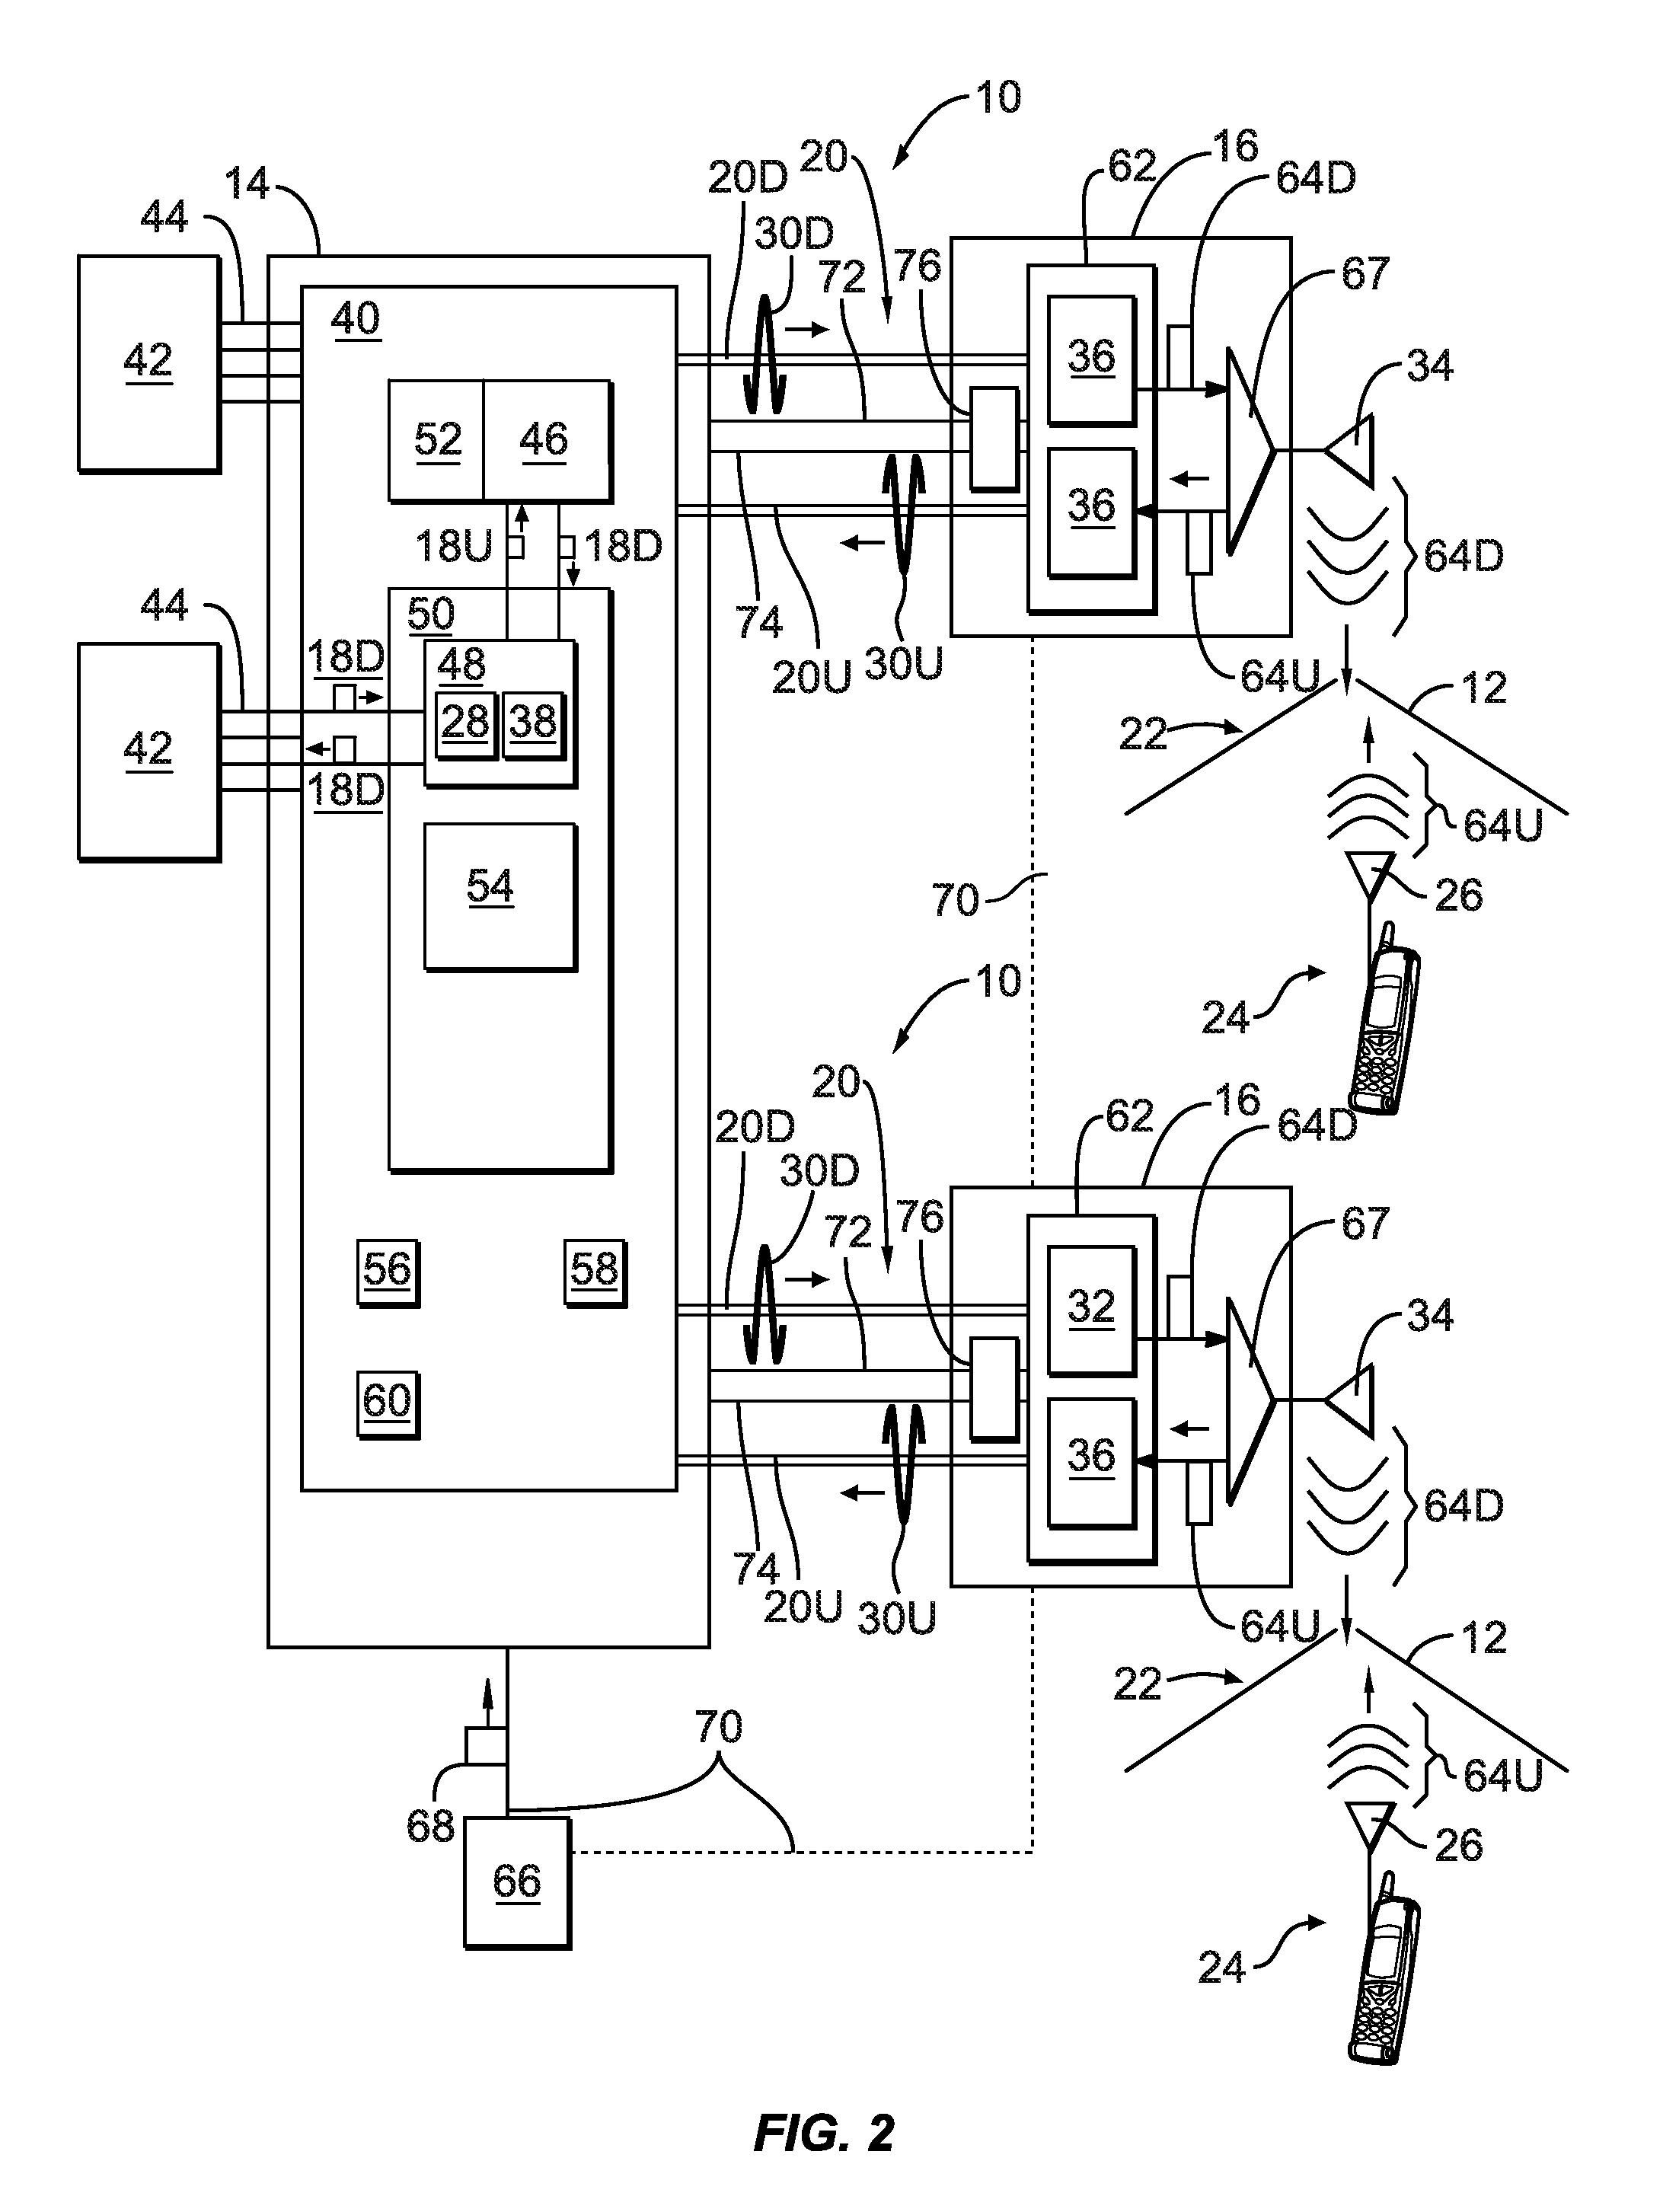 Providing simultaneous digital and analog services and optical fiber-based distributed antenna systems, and related components and methods